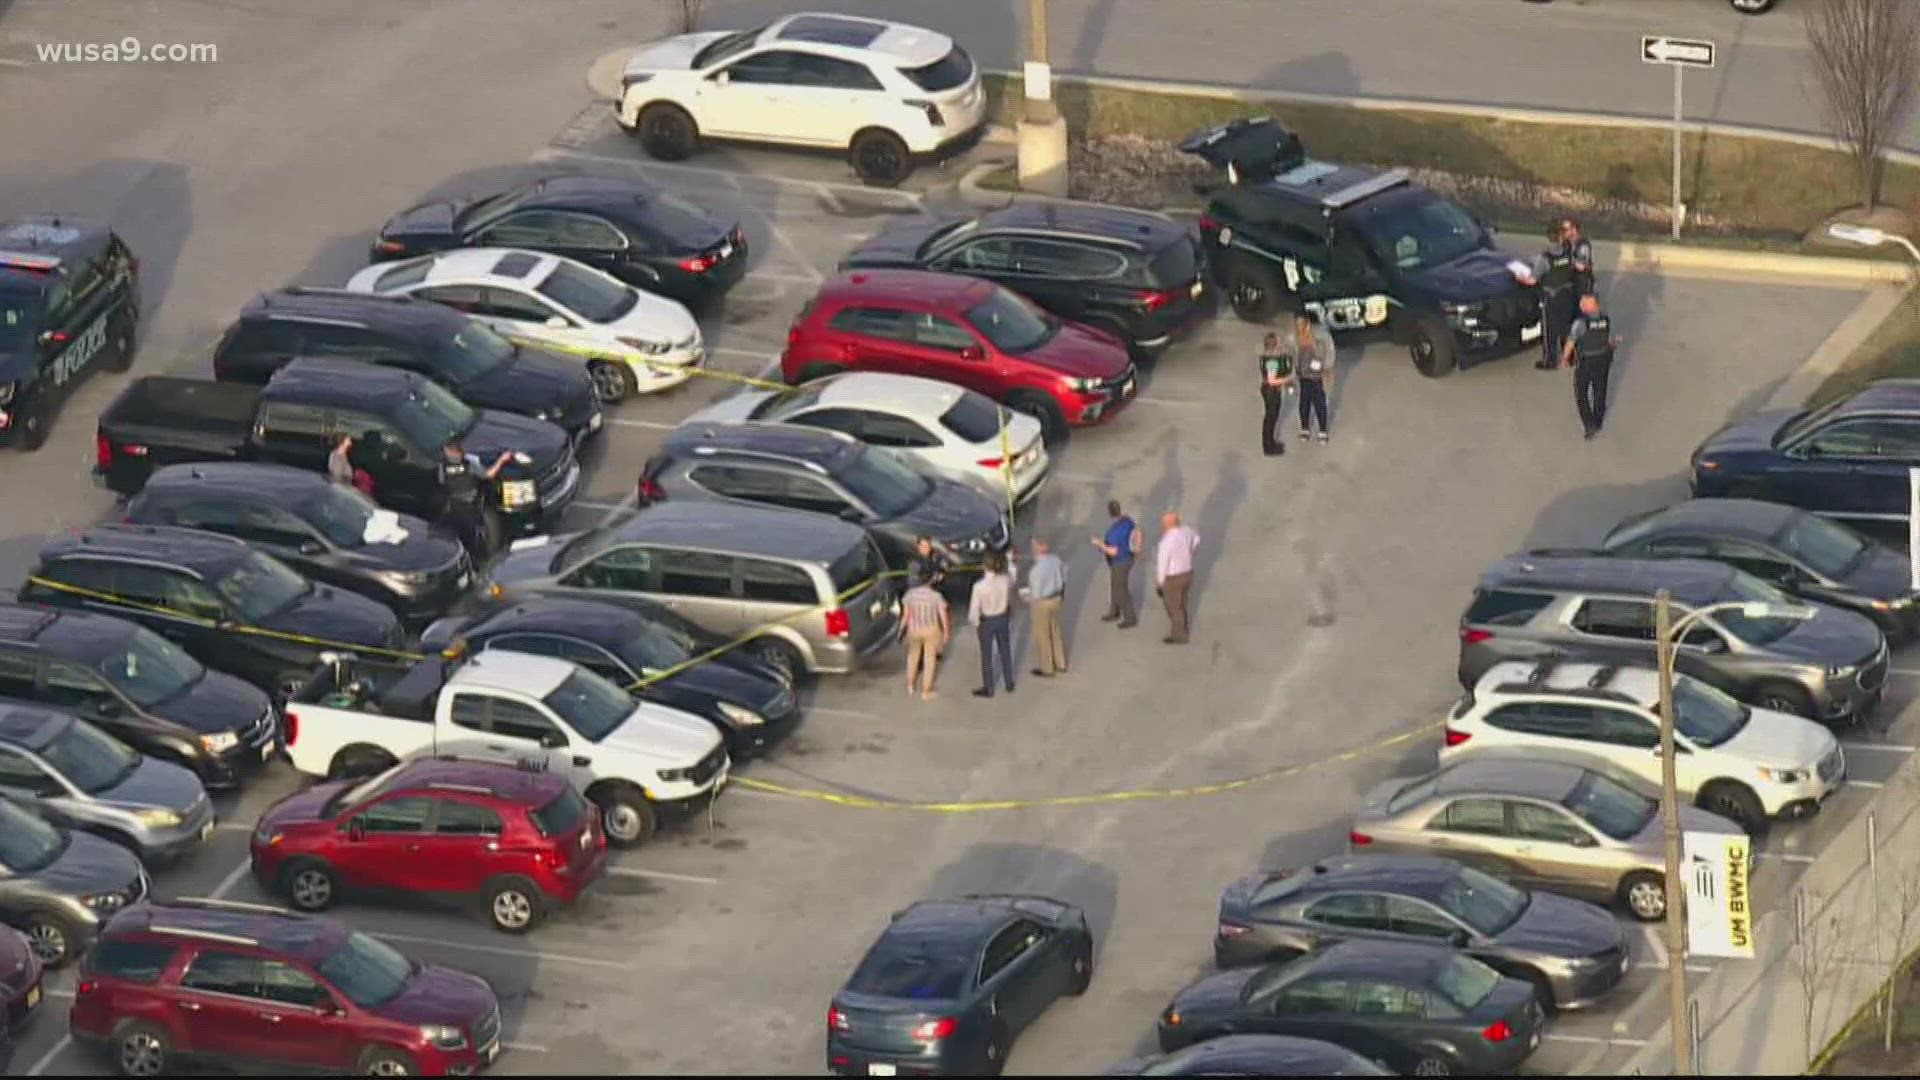 Two men are dead, a father and son, the son allegedly shot the father in the parking of a hospital in Maryland.